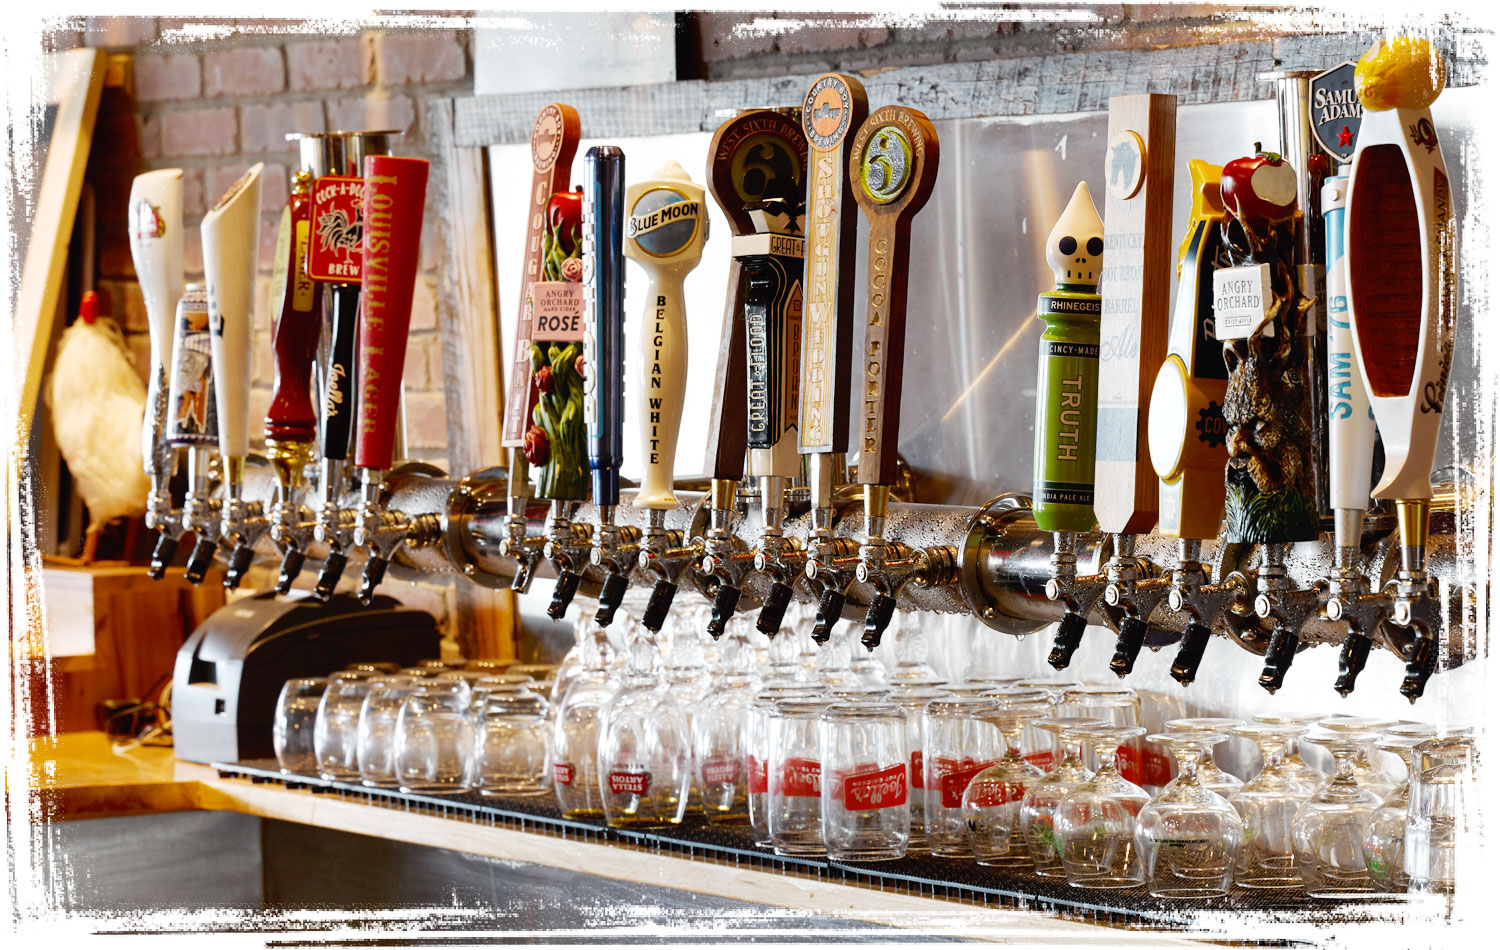 Craft Beers on tap